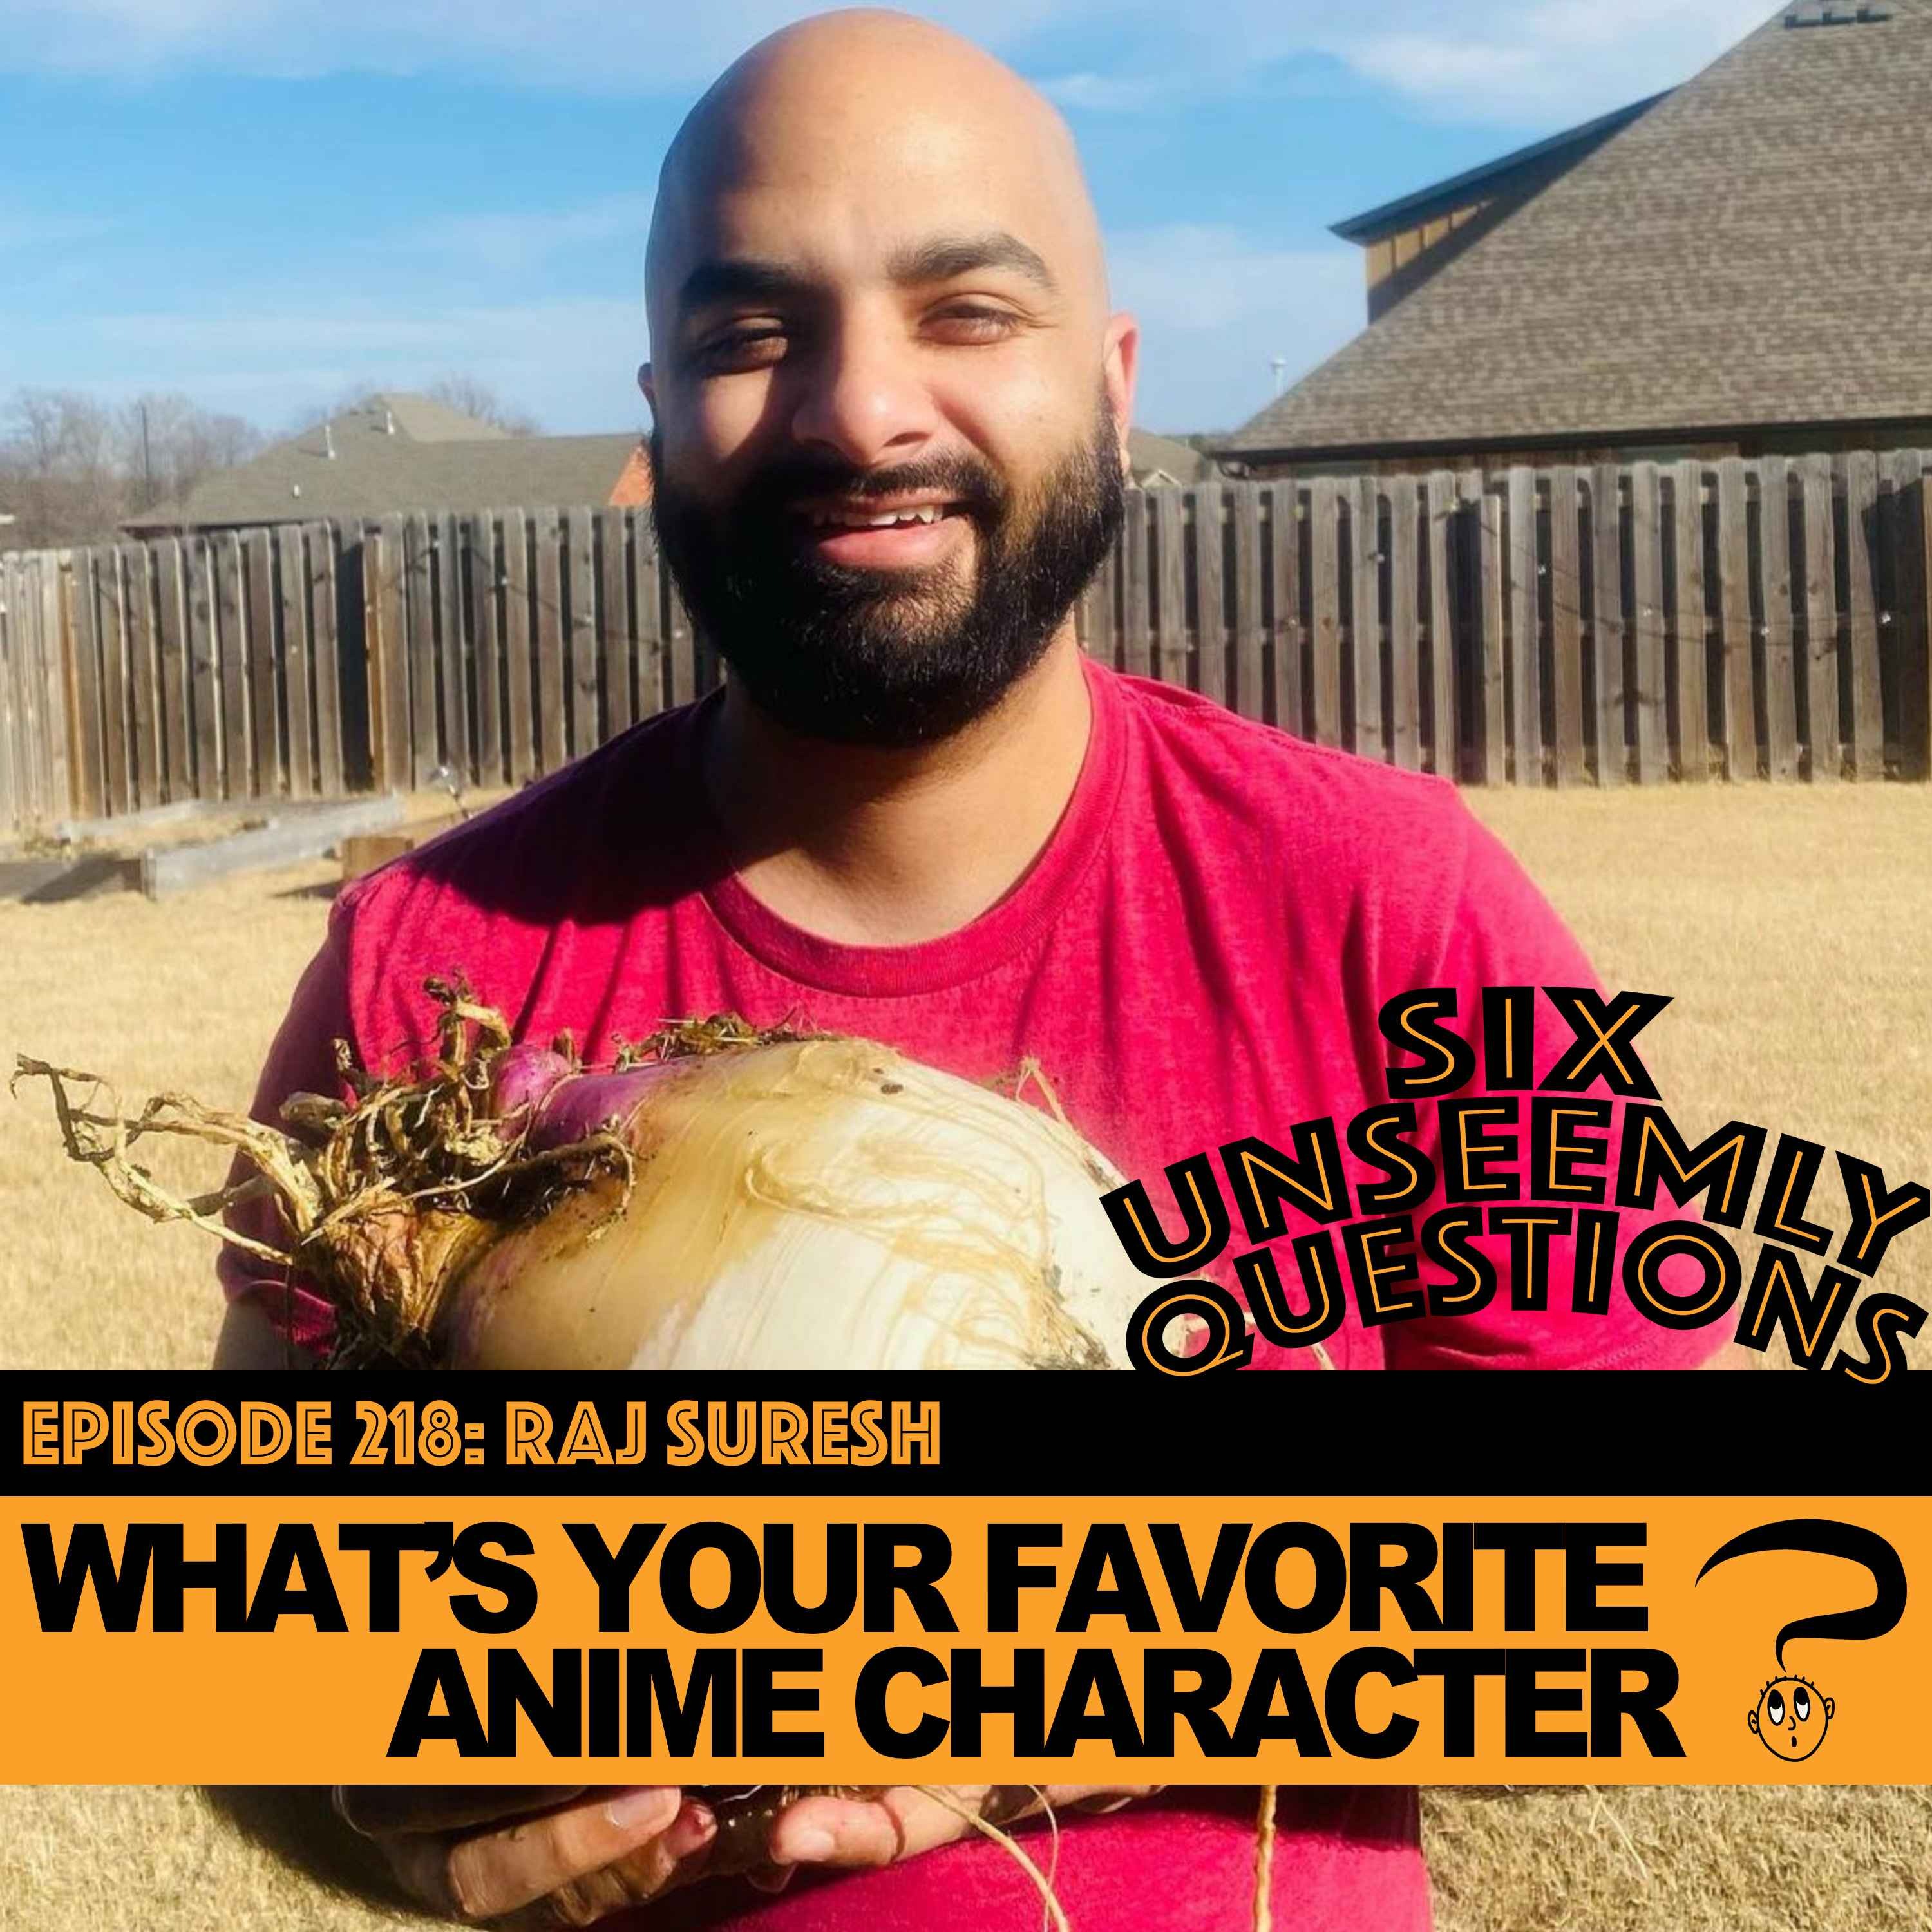 What's your favorite anime character?